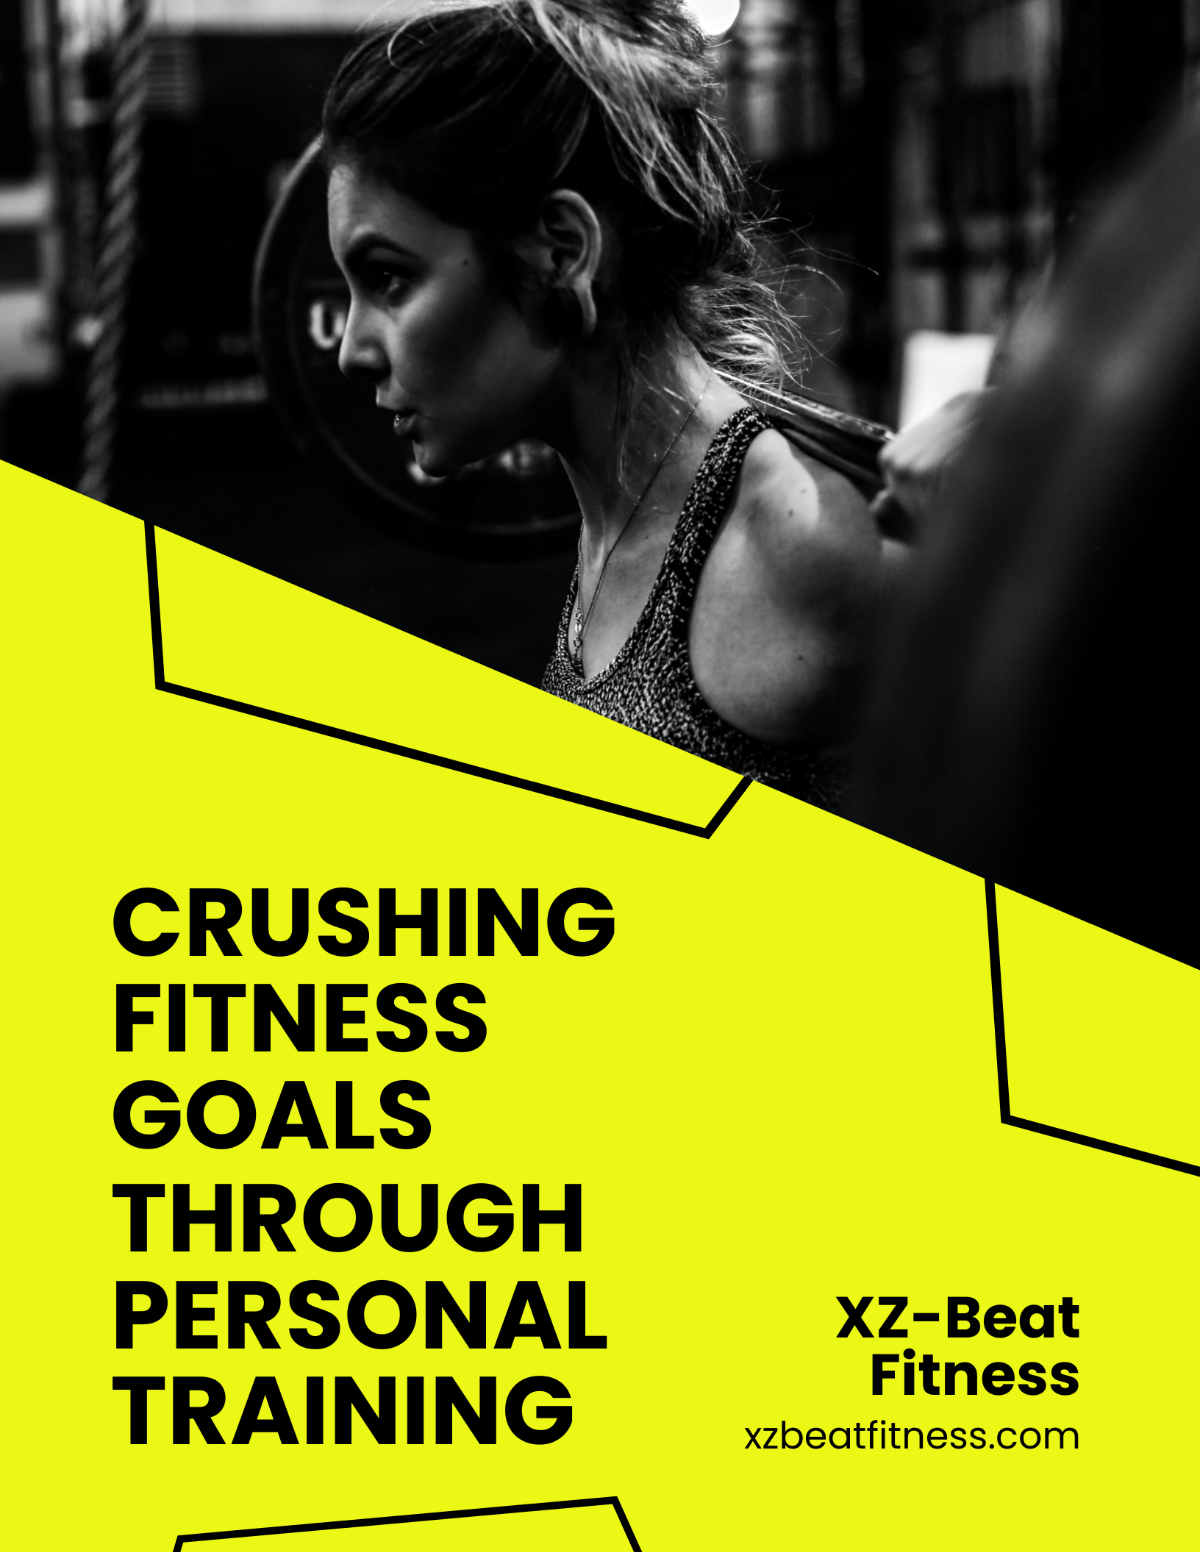 Free Personal Training Flyer Template